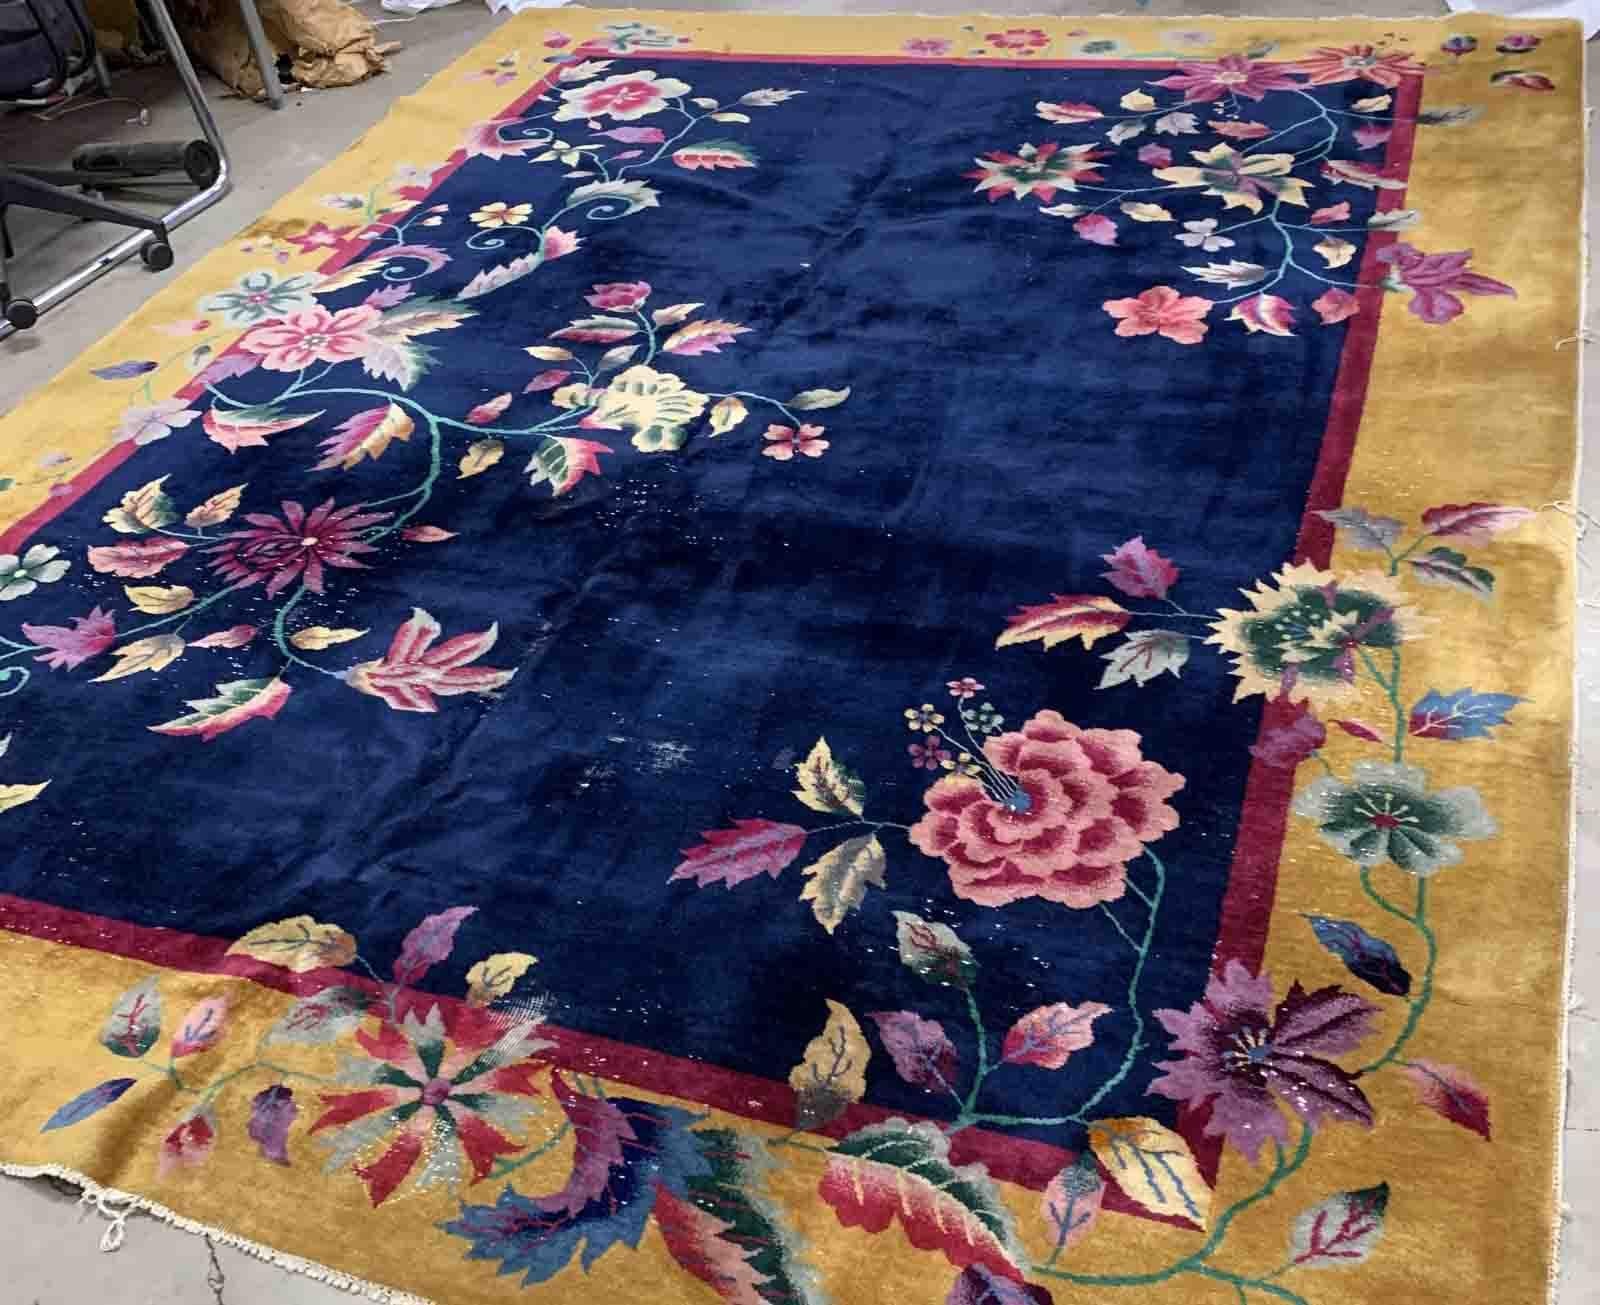 Handmade antique Art Deco Chinese rug in navy blue and golden shades. The rug is from the beginning of 20th century in original condition, it has some low pile. 

-condition: original, some low pile,

-circa: 1920s,

-size: 9.1' x 11.6' (277cm